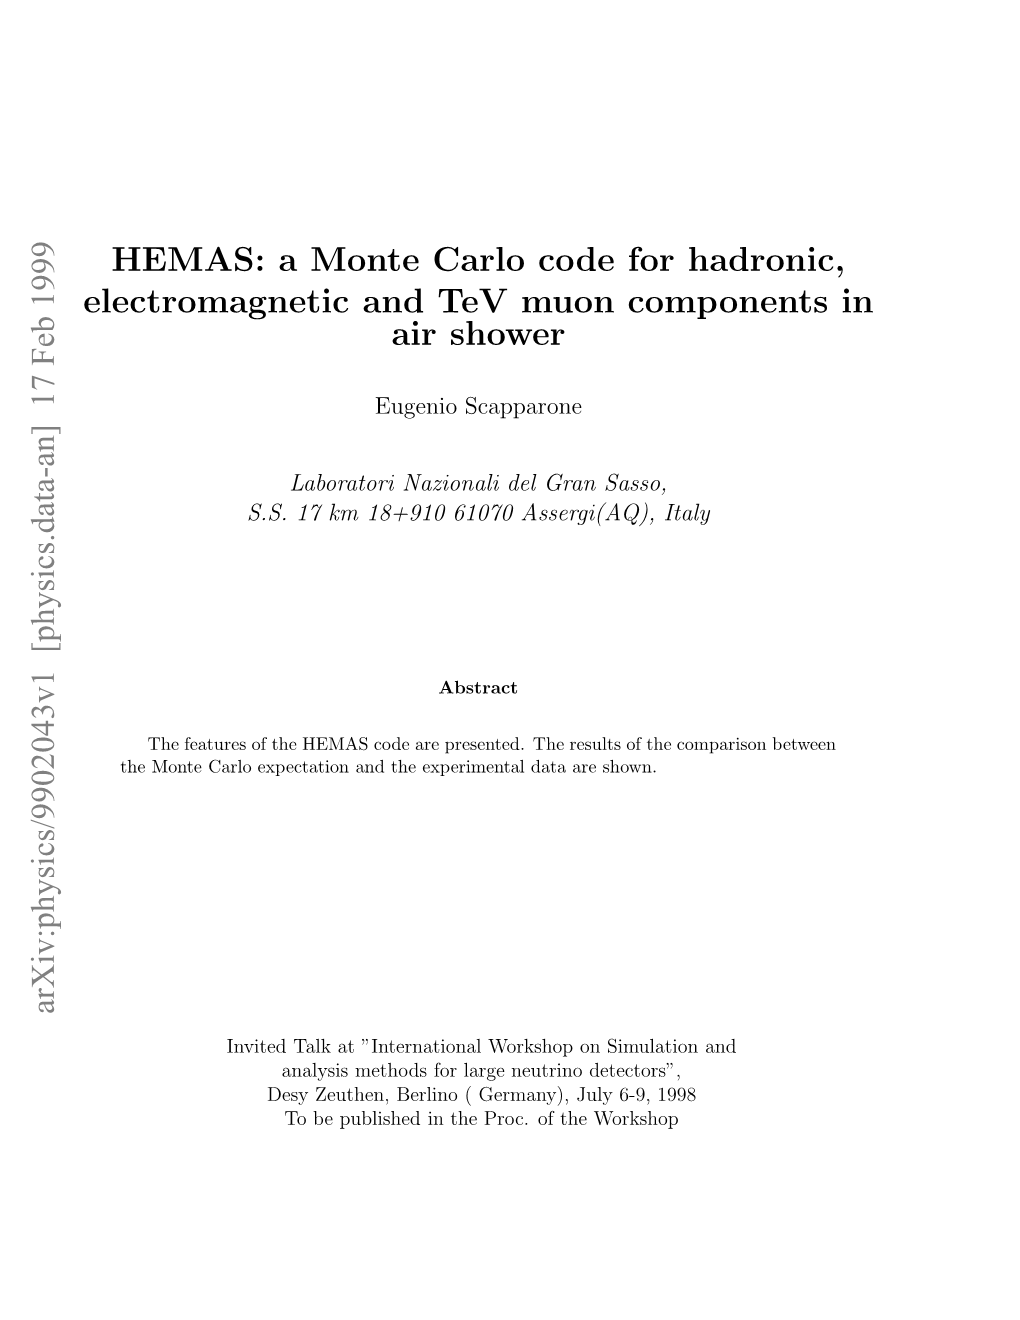 HEMAS: a Monte Carlo Code for Hadronic, Electromagnetic and Tev